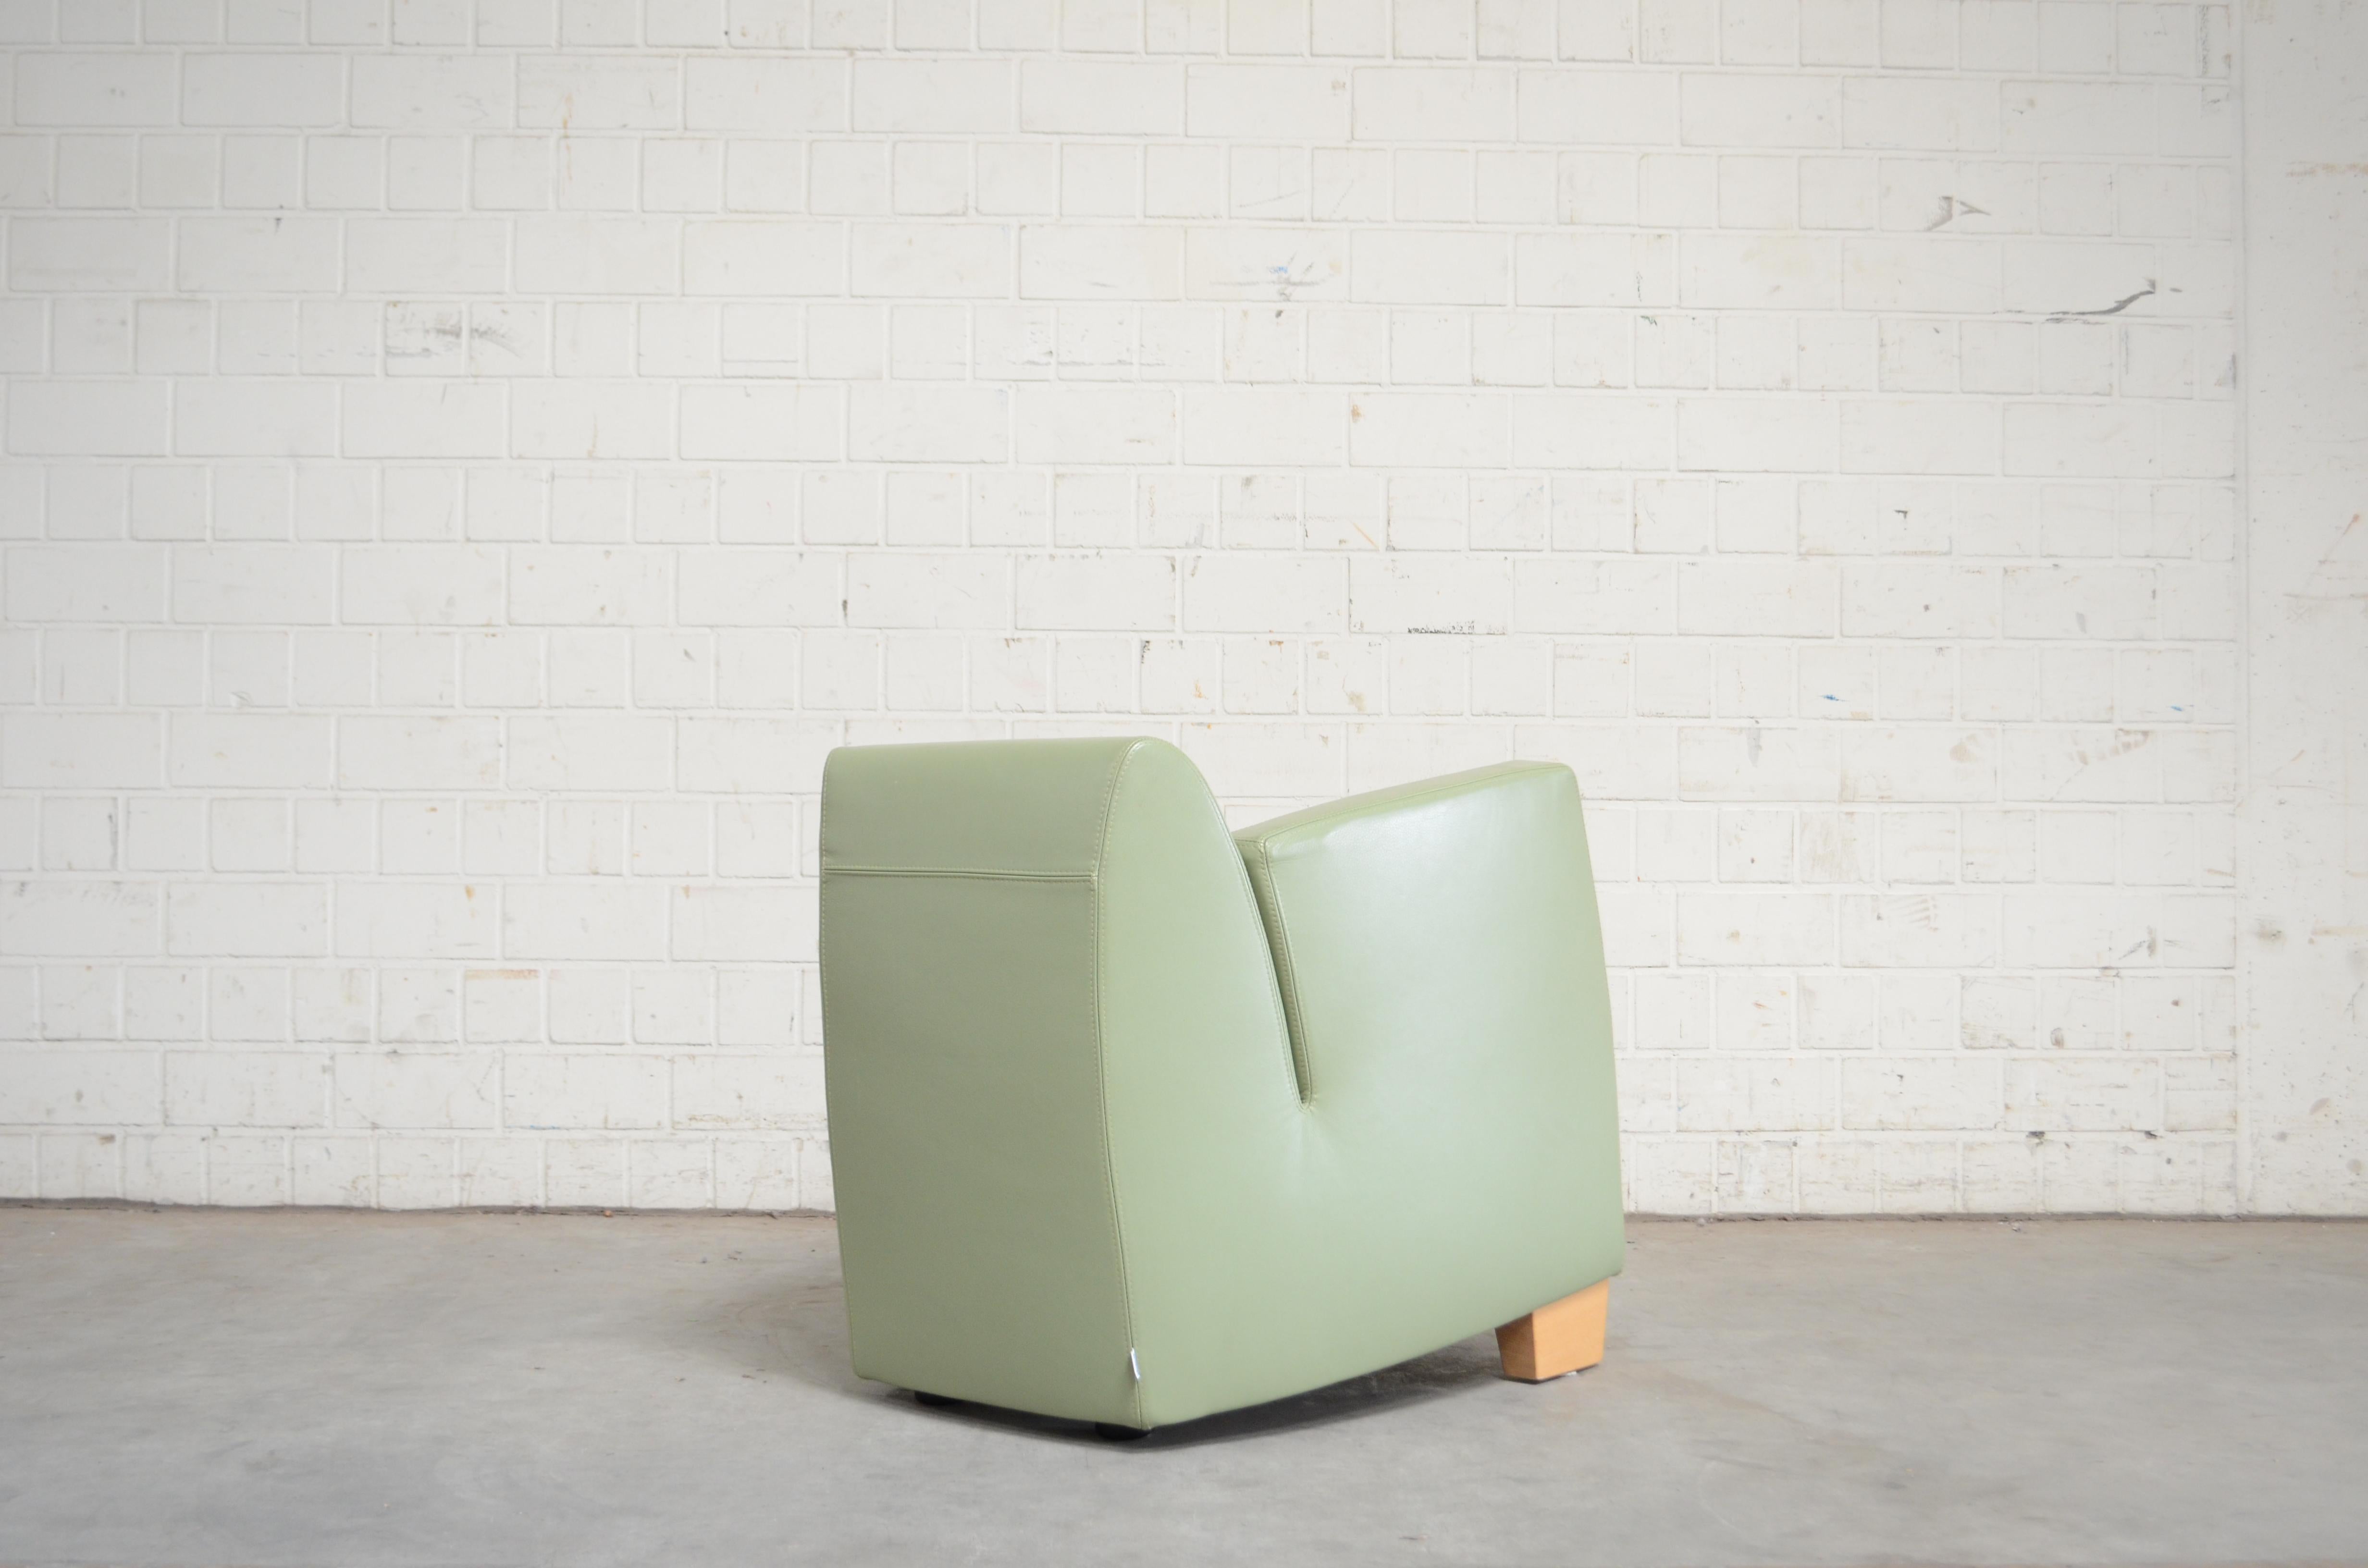 This small armchair SeNa DS 2620 was designed by Kurt Erni 1995 for the swiss manufacture Team by Wellis.
De Sede was buying Team by Wellis in the year 2012 and this armchair was produced since then 2012 by De Sede.
This chair was the first